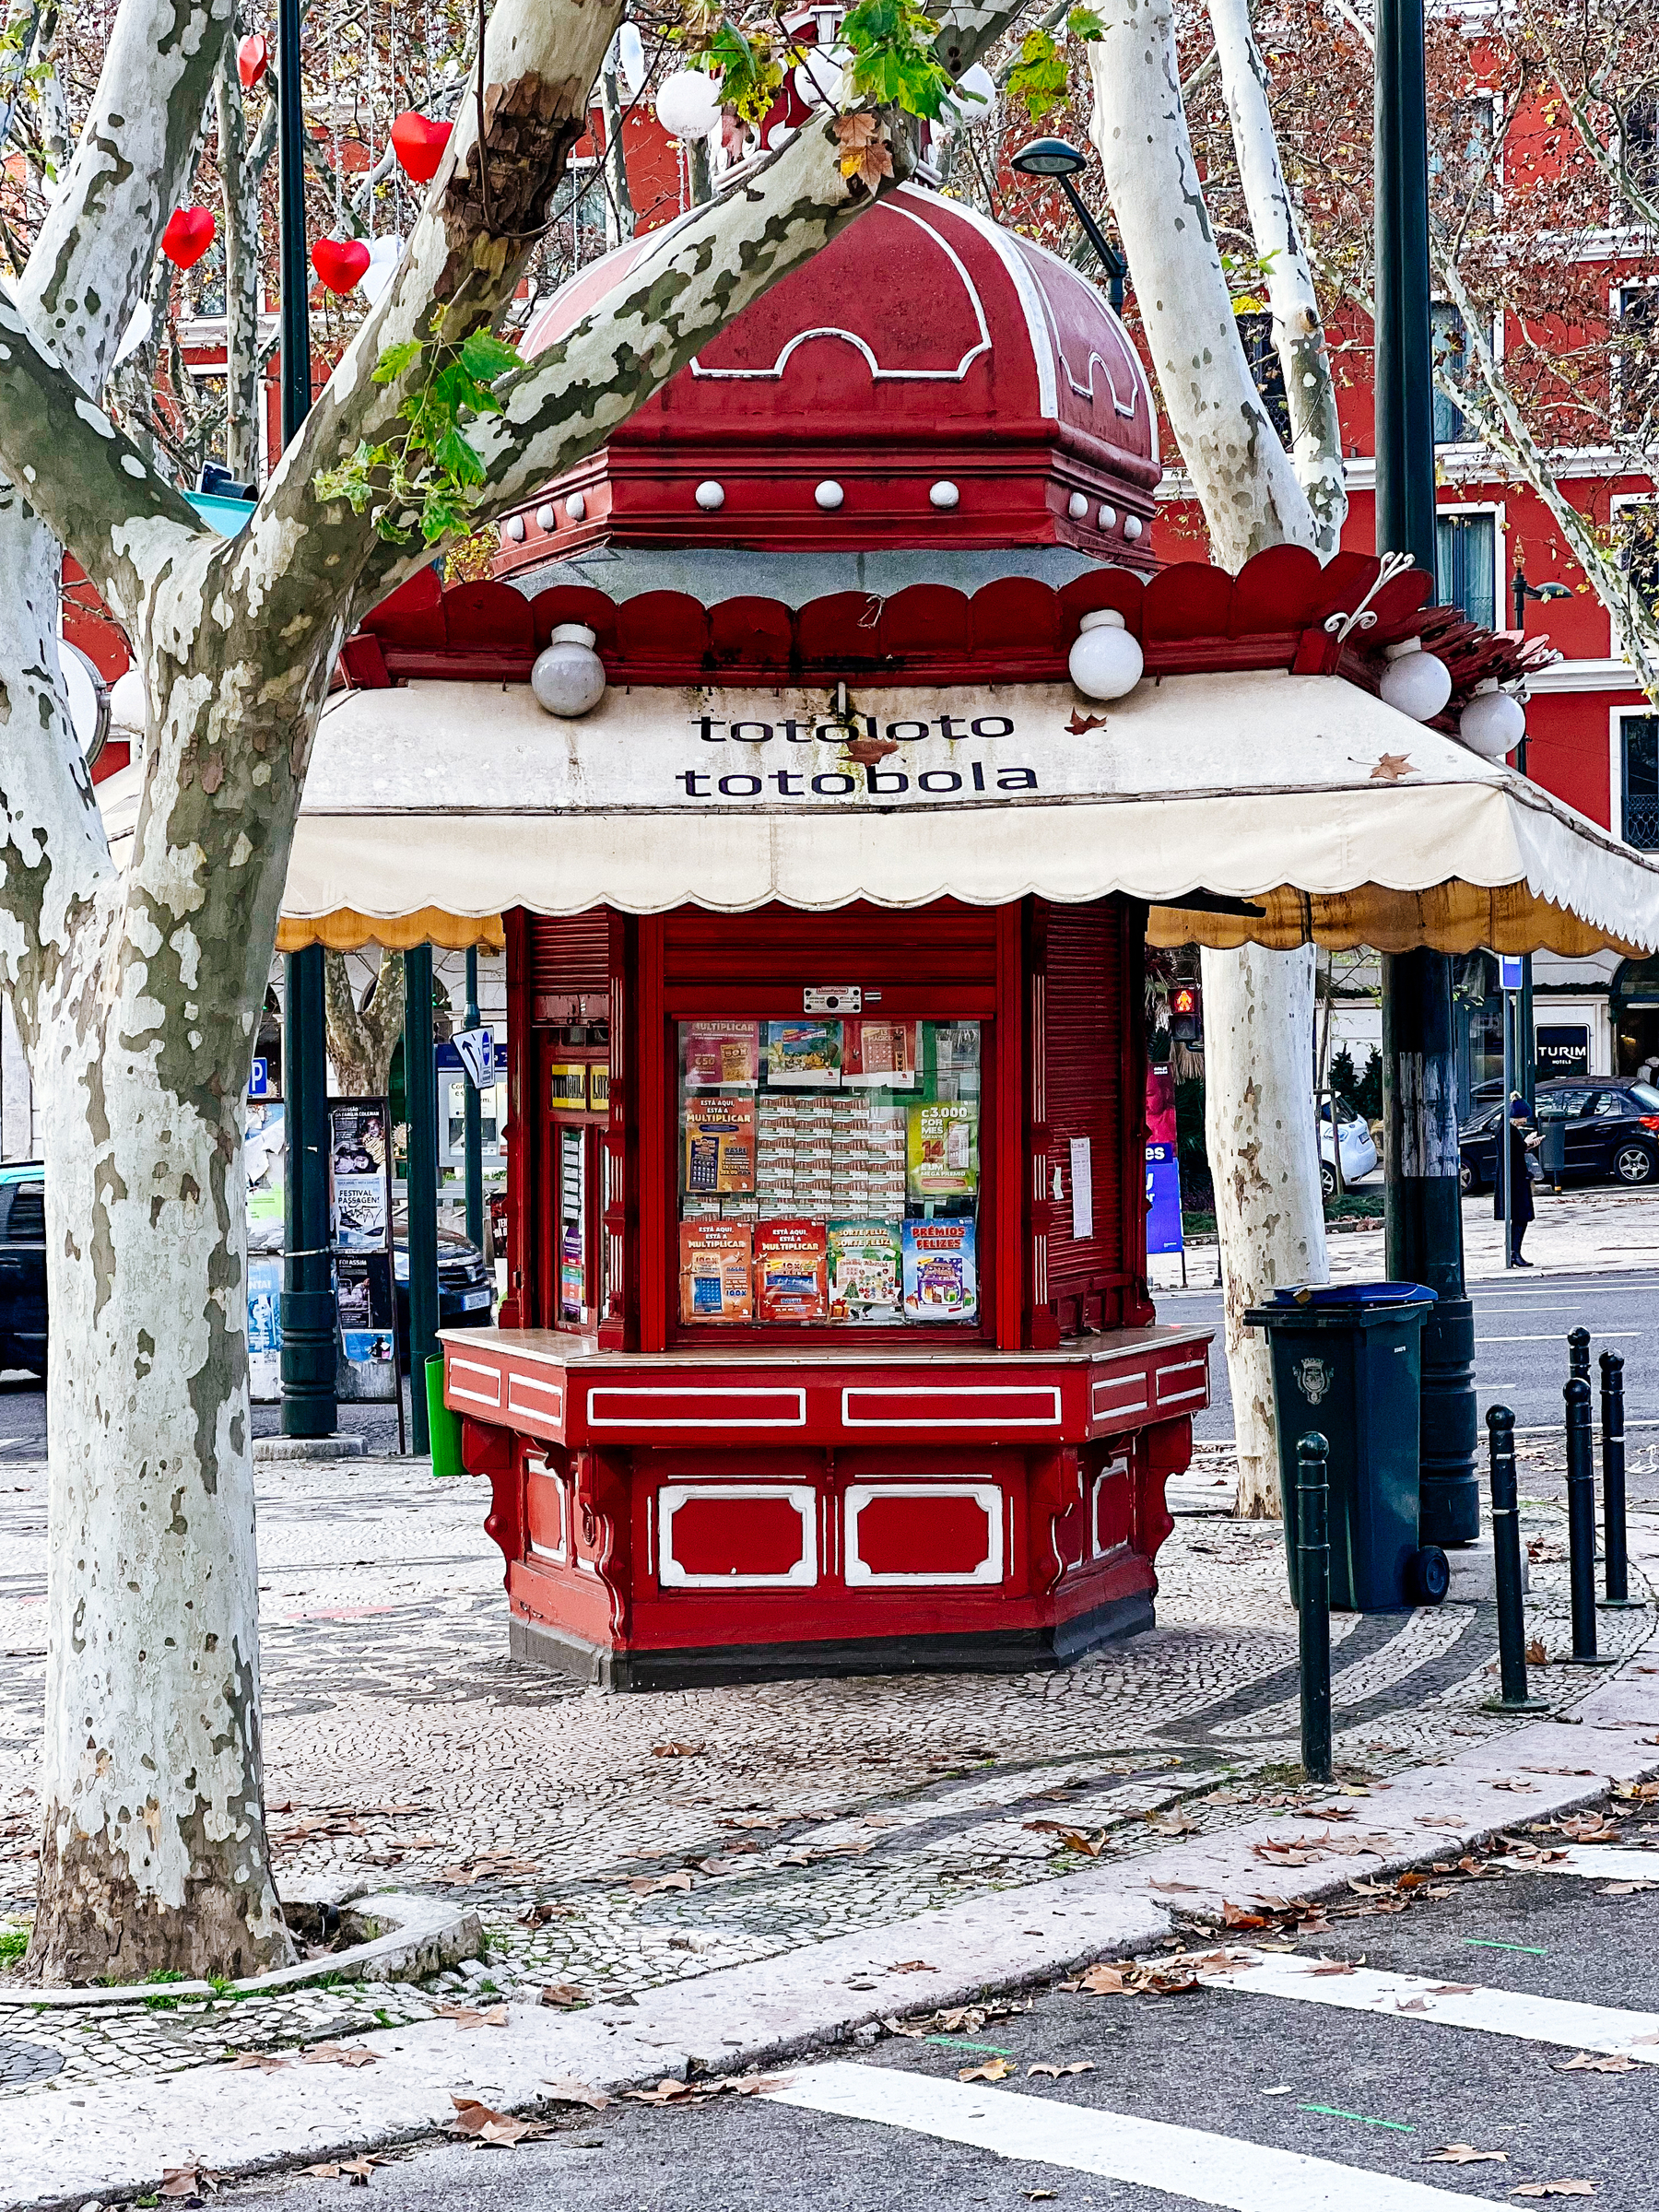 A vibrant red kiosk with &ldquo;TOTOLOTO TOTOBOLA&rdquo; lettering, nestled between two trees with mottled bark, on a cobblestone sidewalk. The kiosk has a dome-like top.